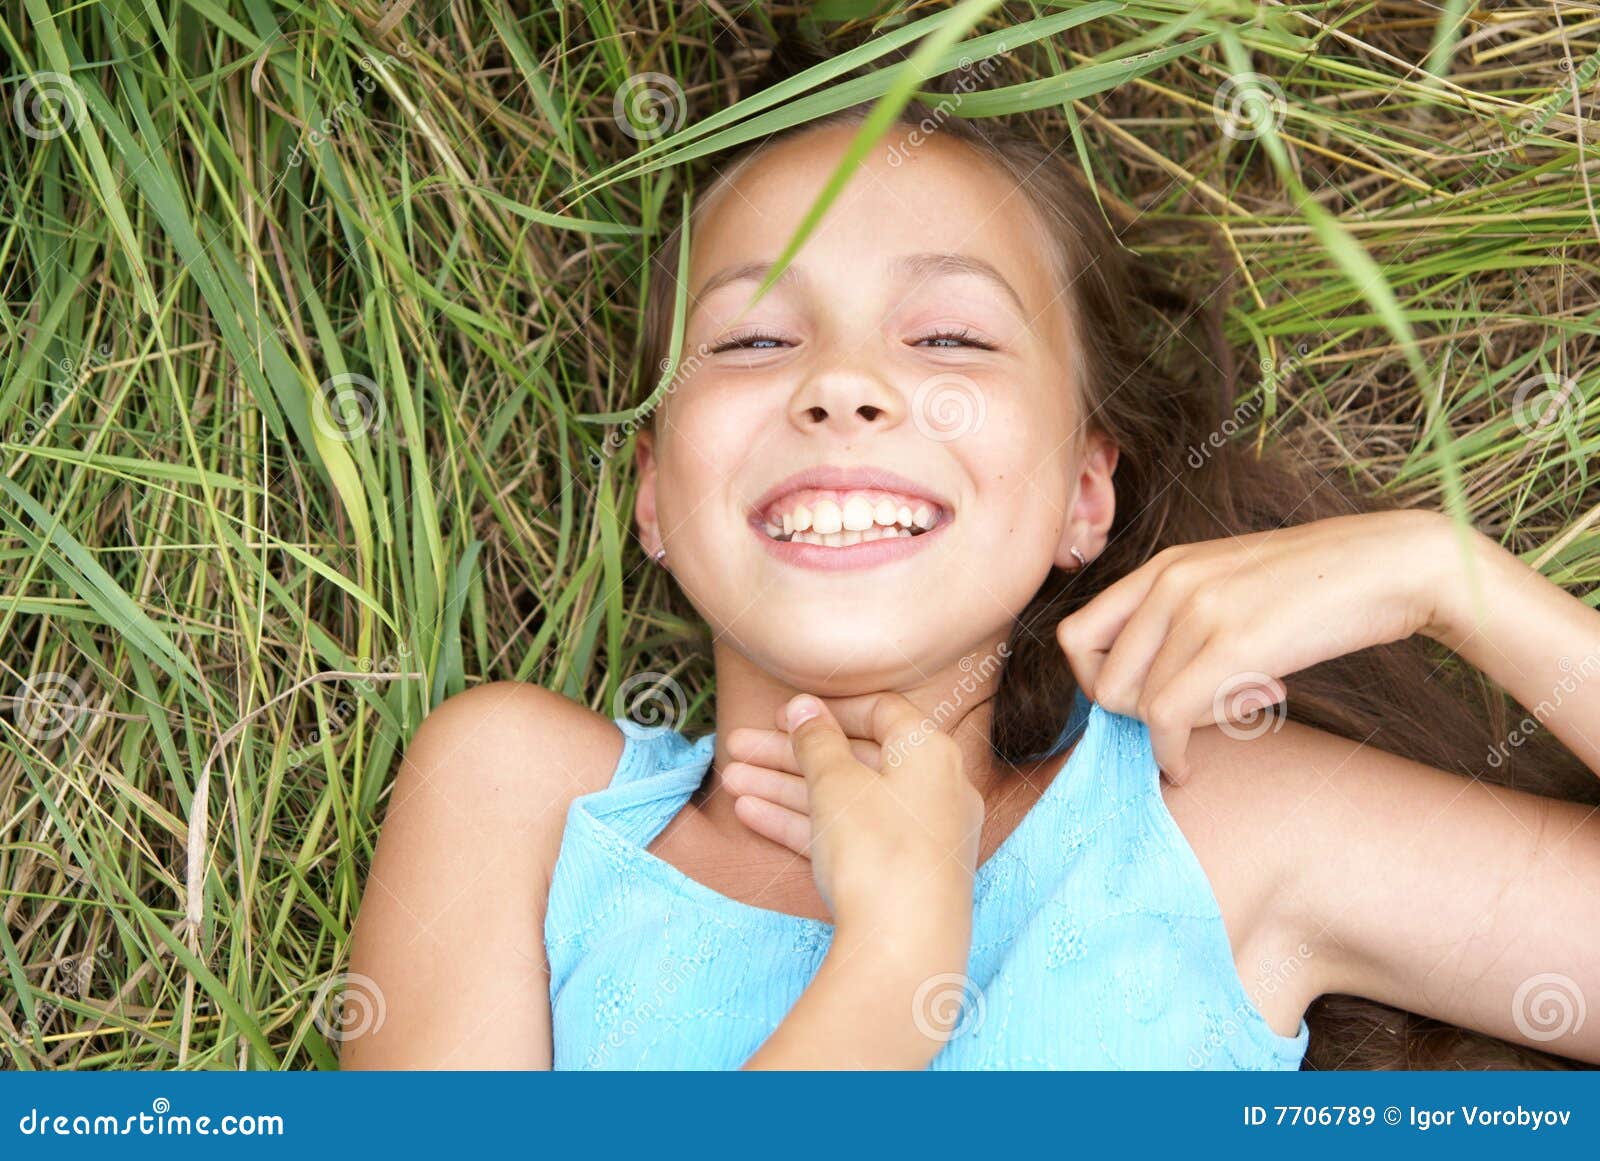 Preteen Girl In Green Grass Royalty Free Stock Photo 